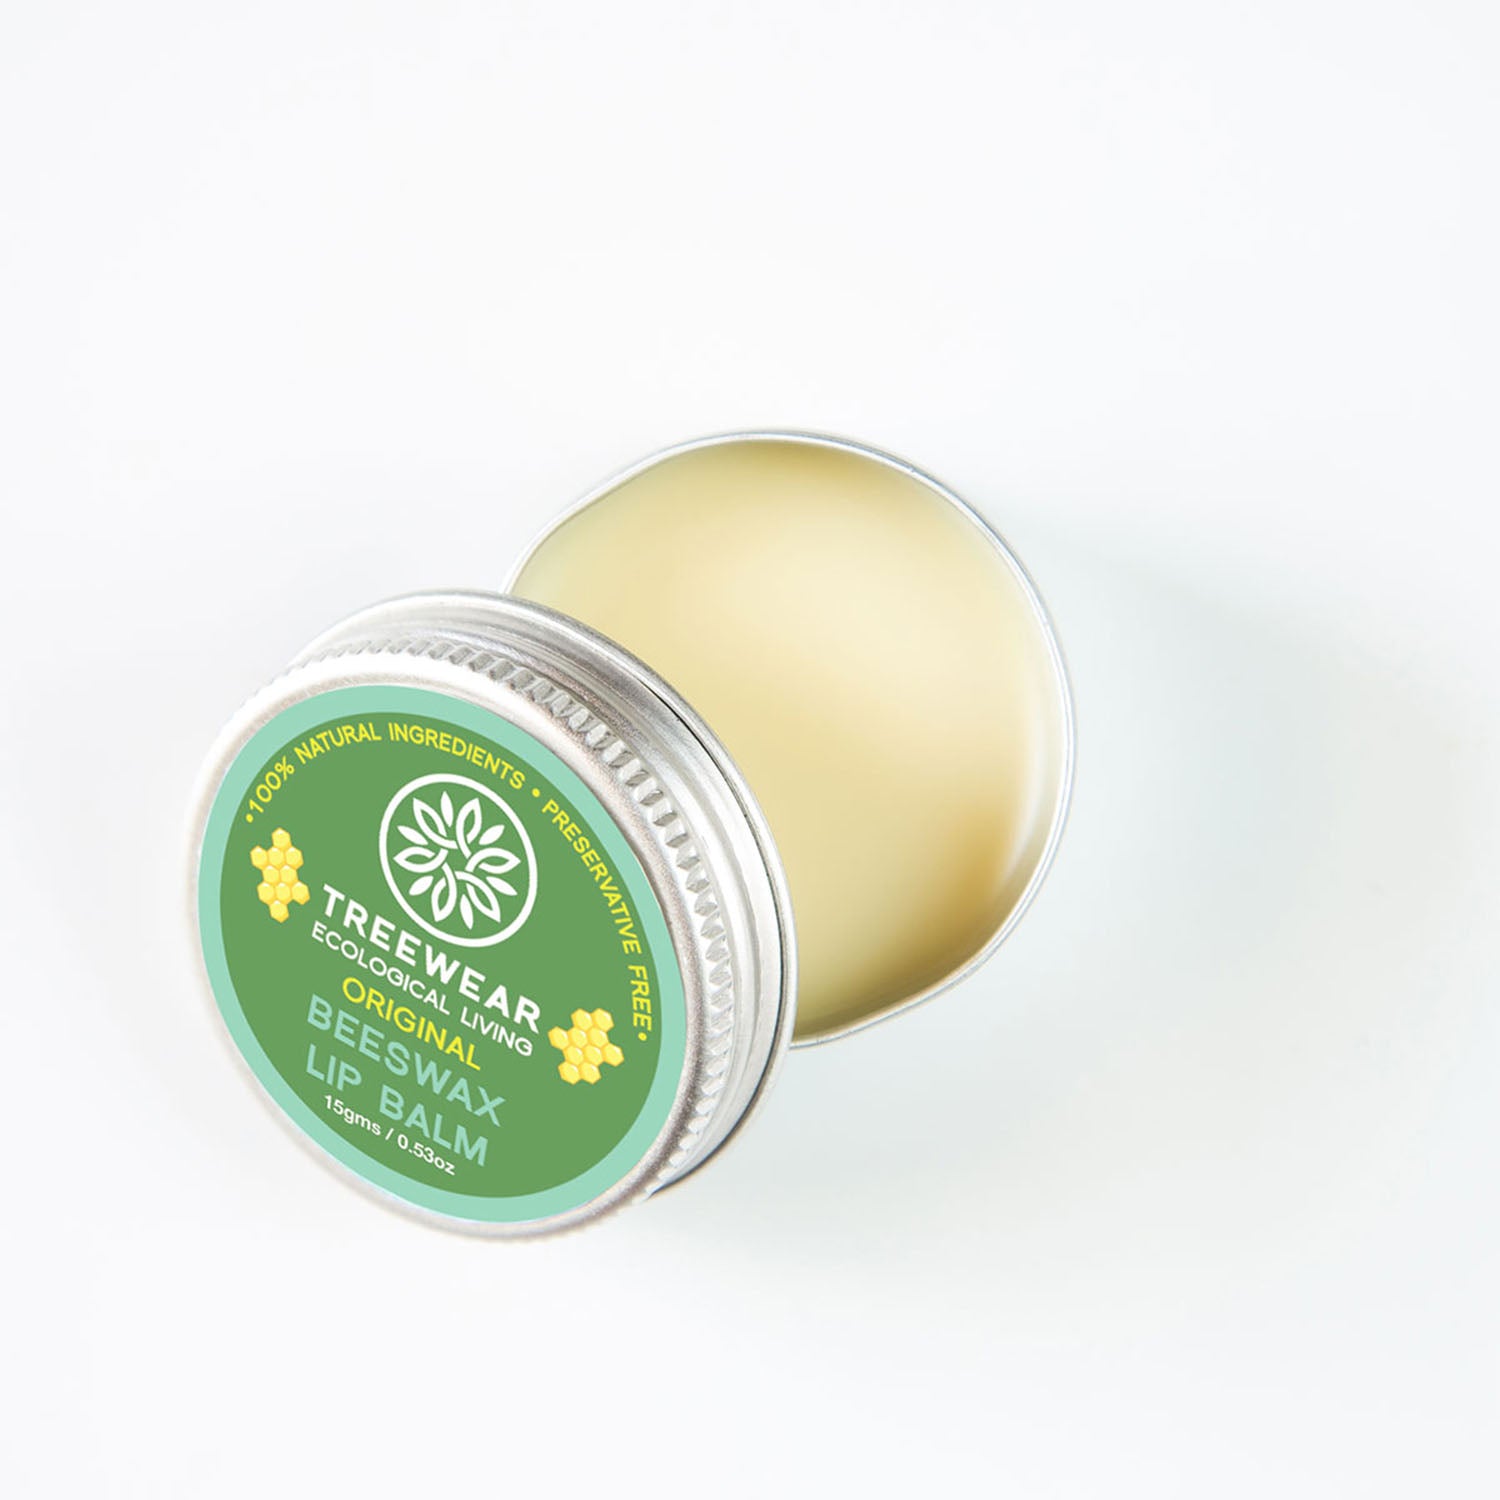 Beeswax Lip Balm - Unscented